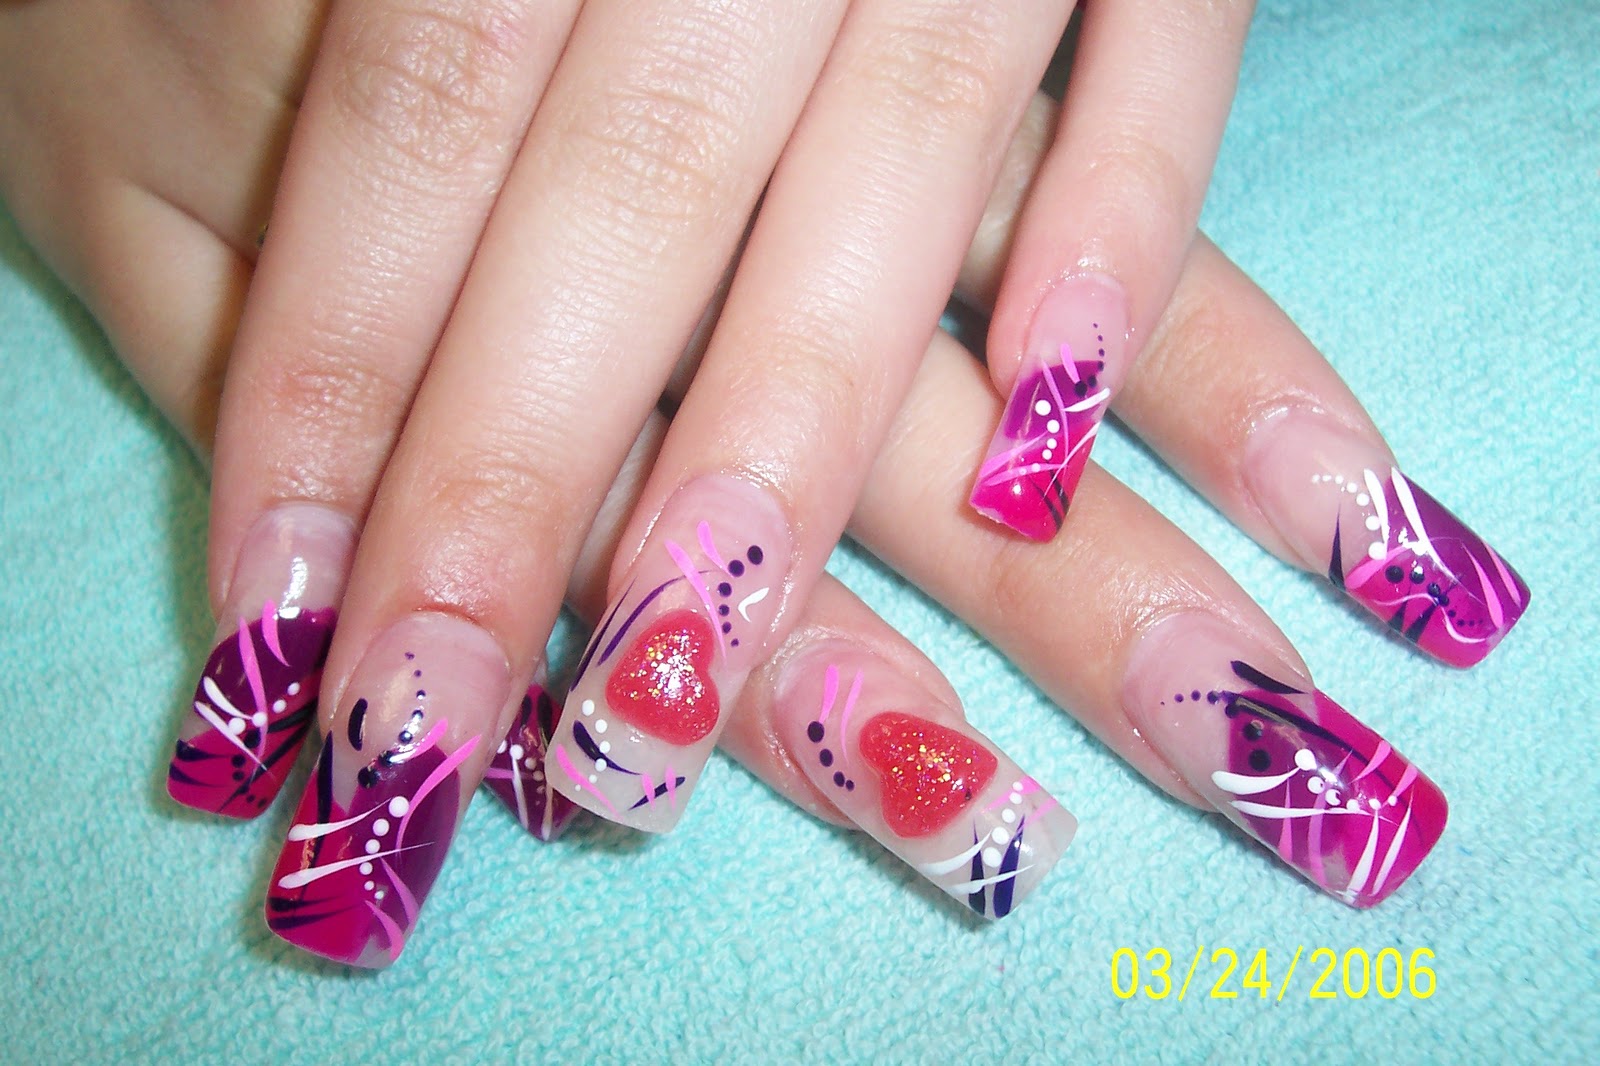 great looking acrylic nail design with an attractive floral design